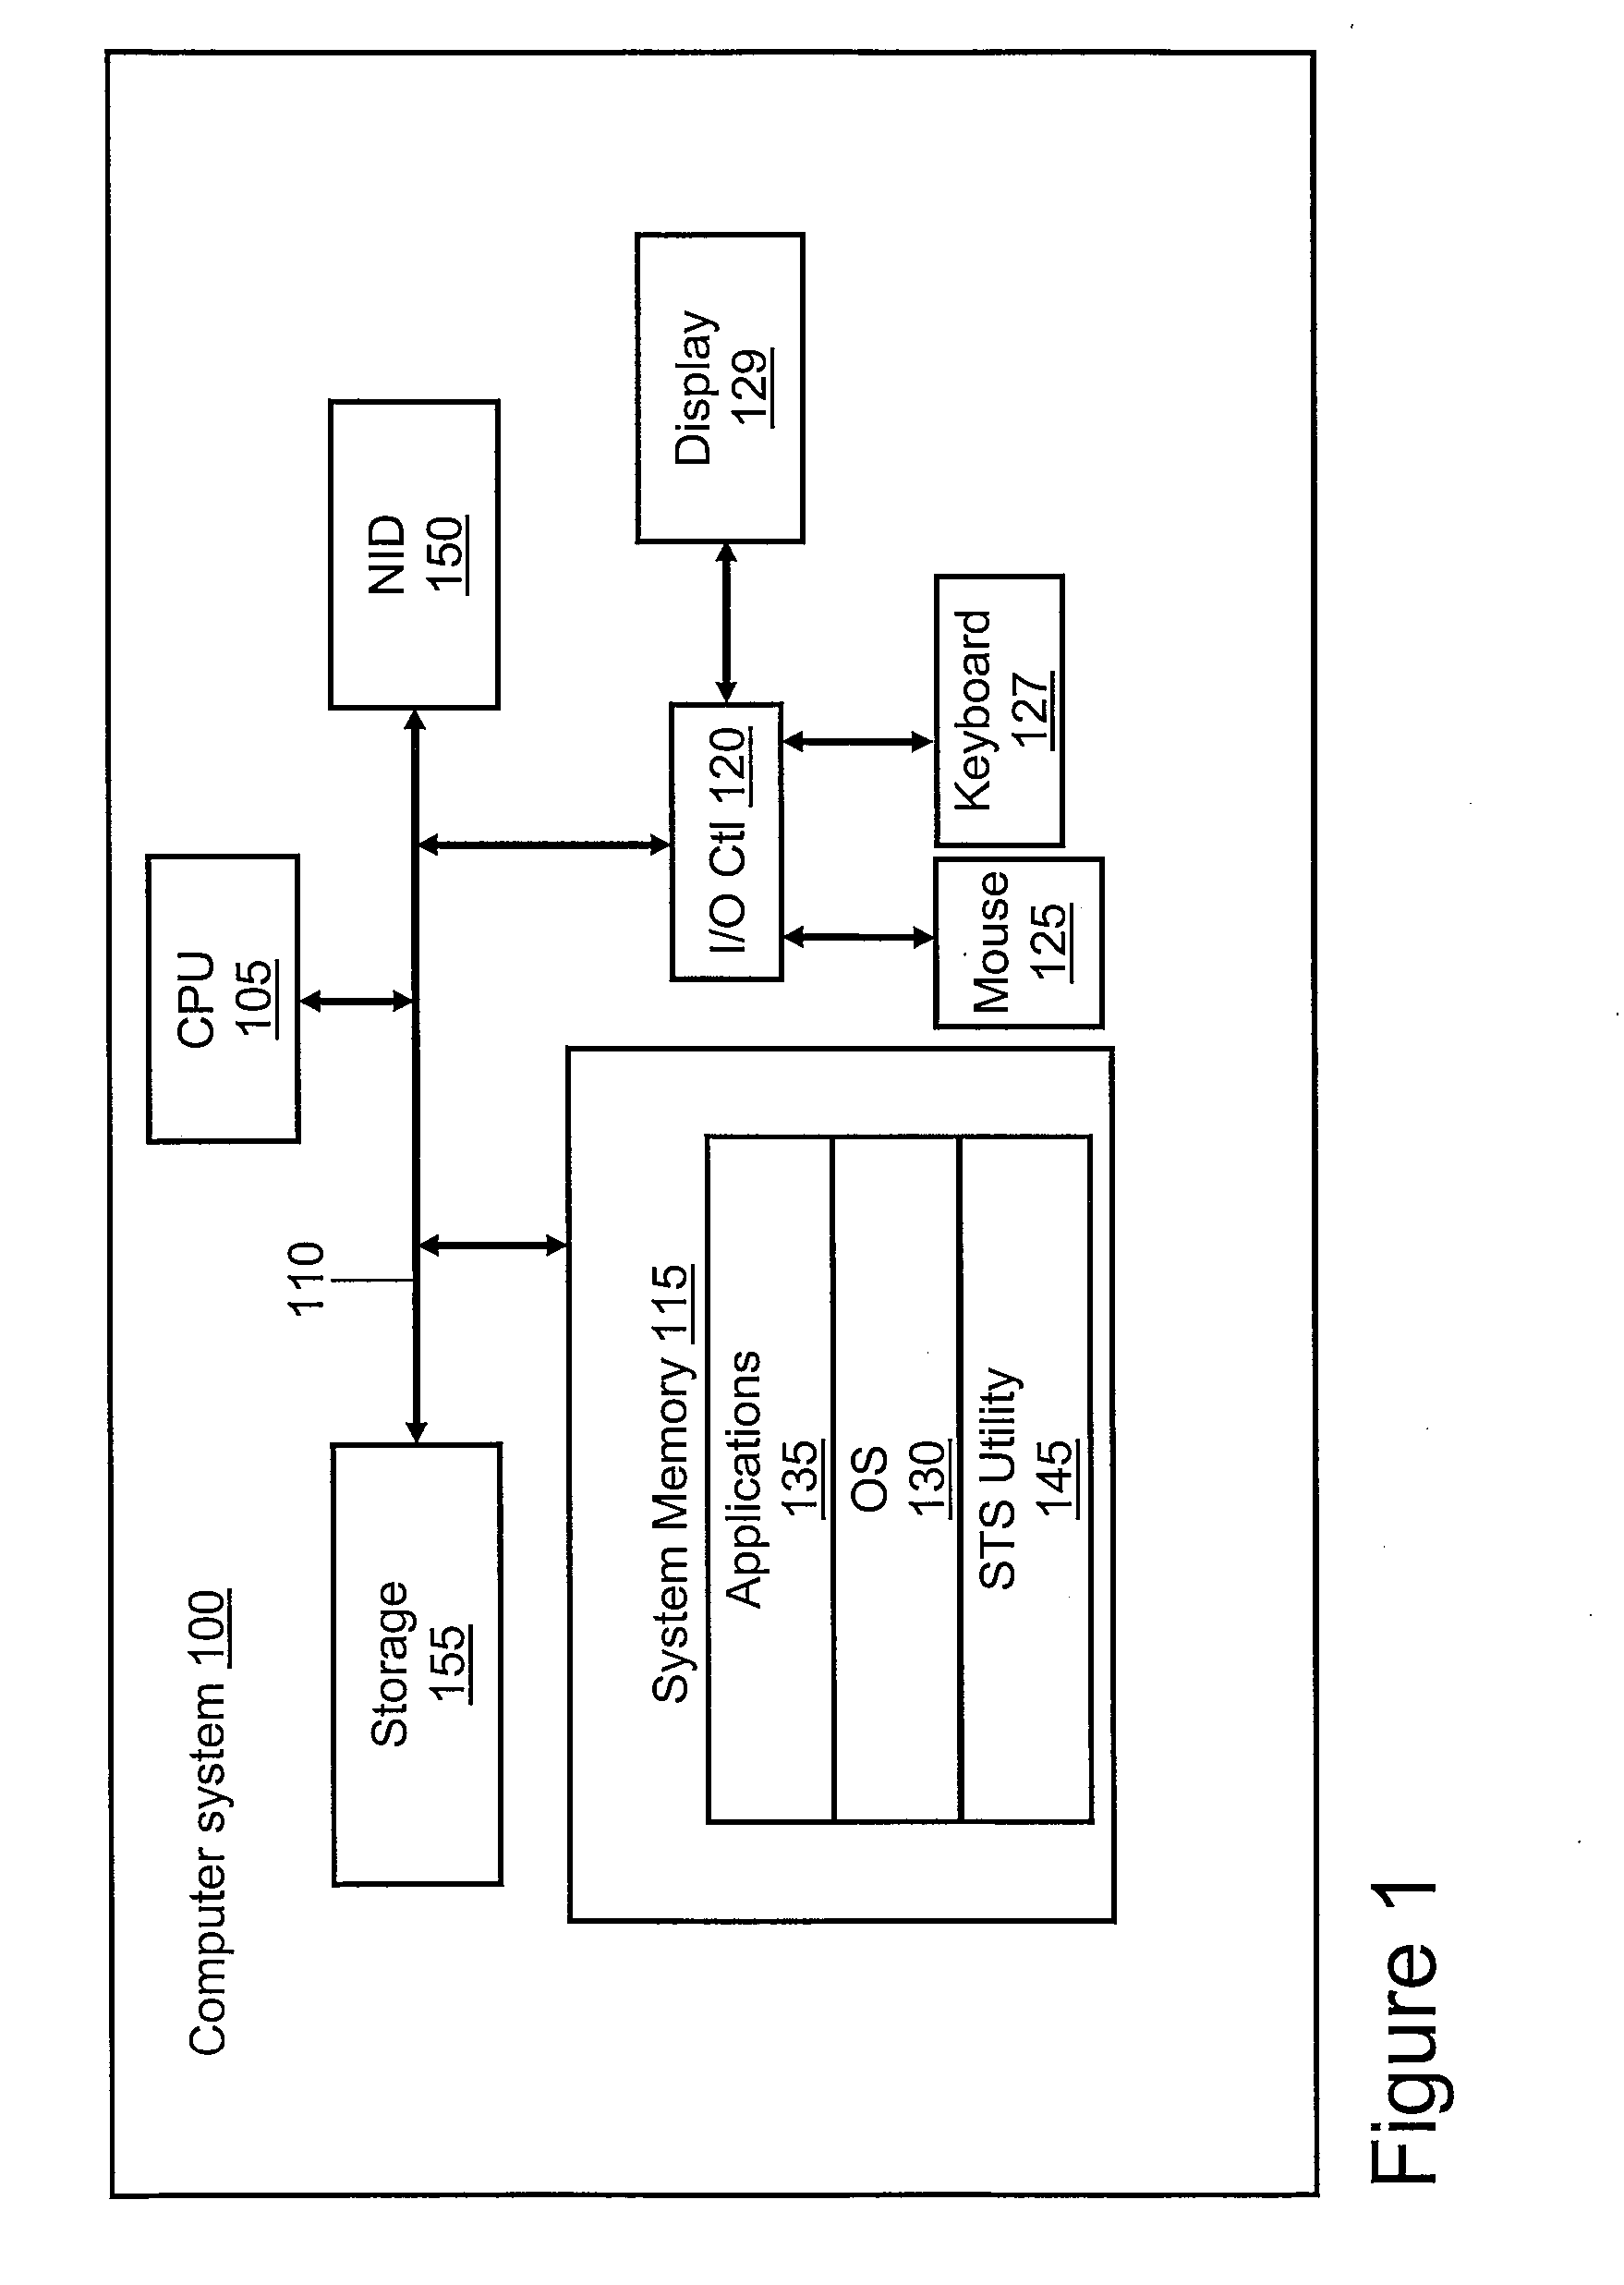 Method for application layer synchronous traffic shaping